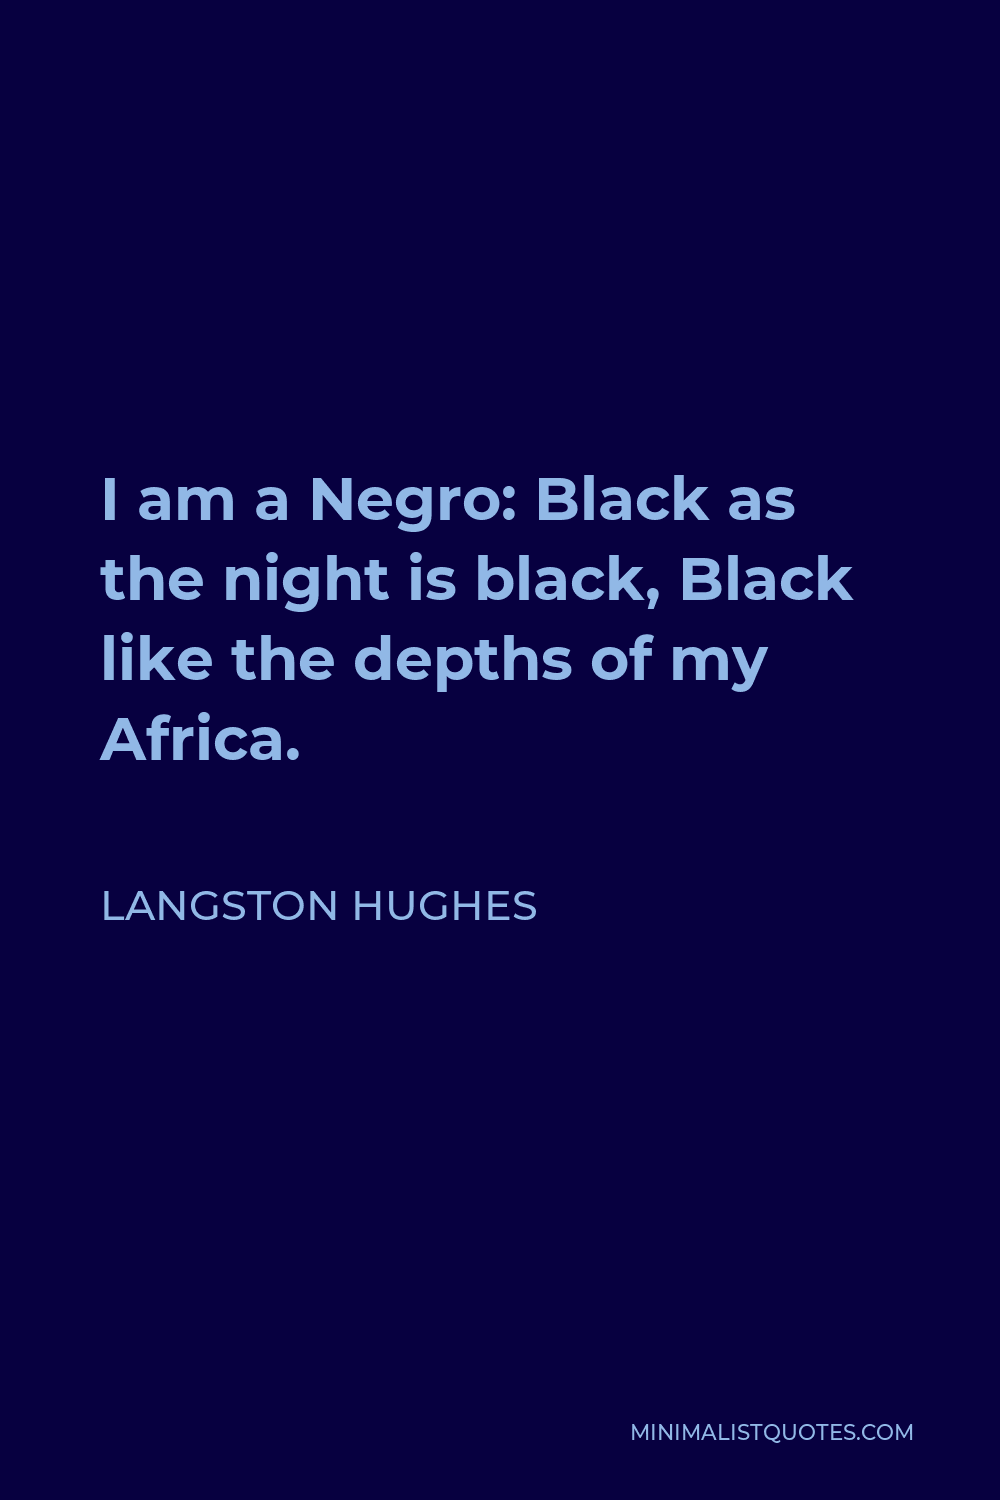 Langston Hughes Quote - I am a Negro: Black as the night is black, Black like the depths of my Africa.